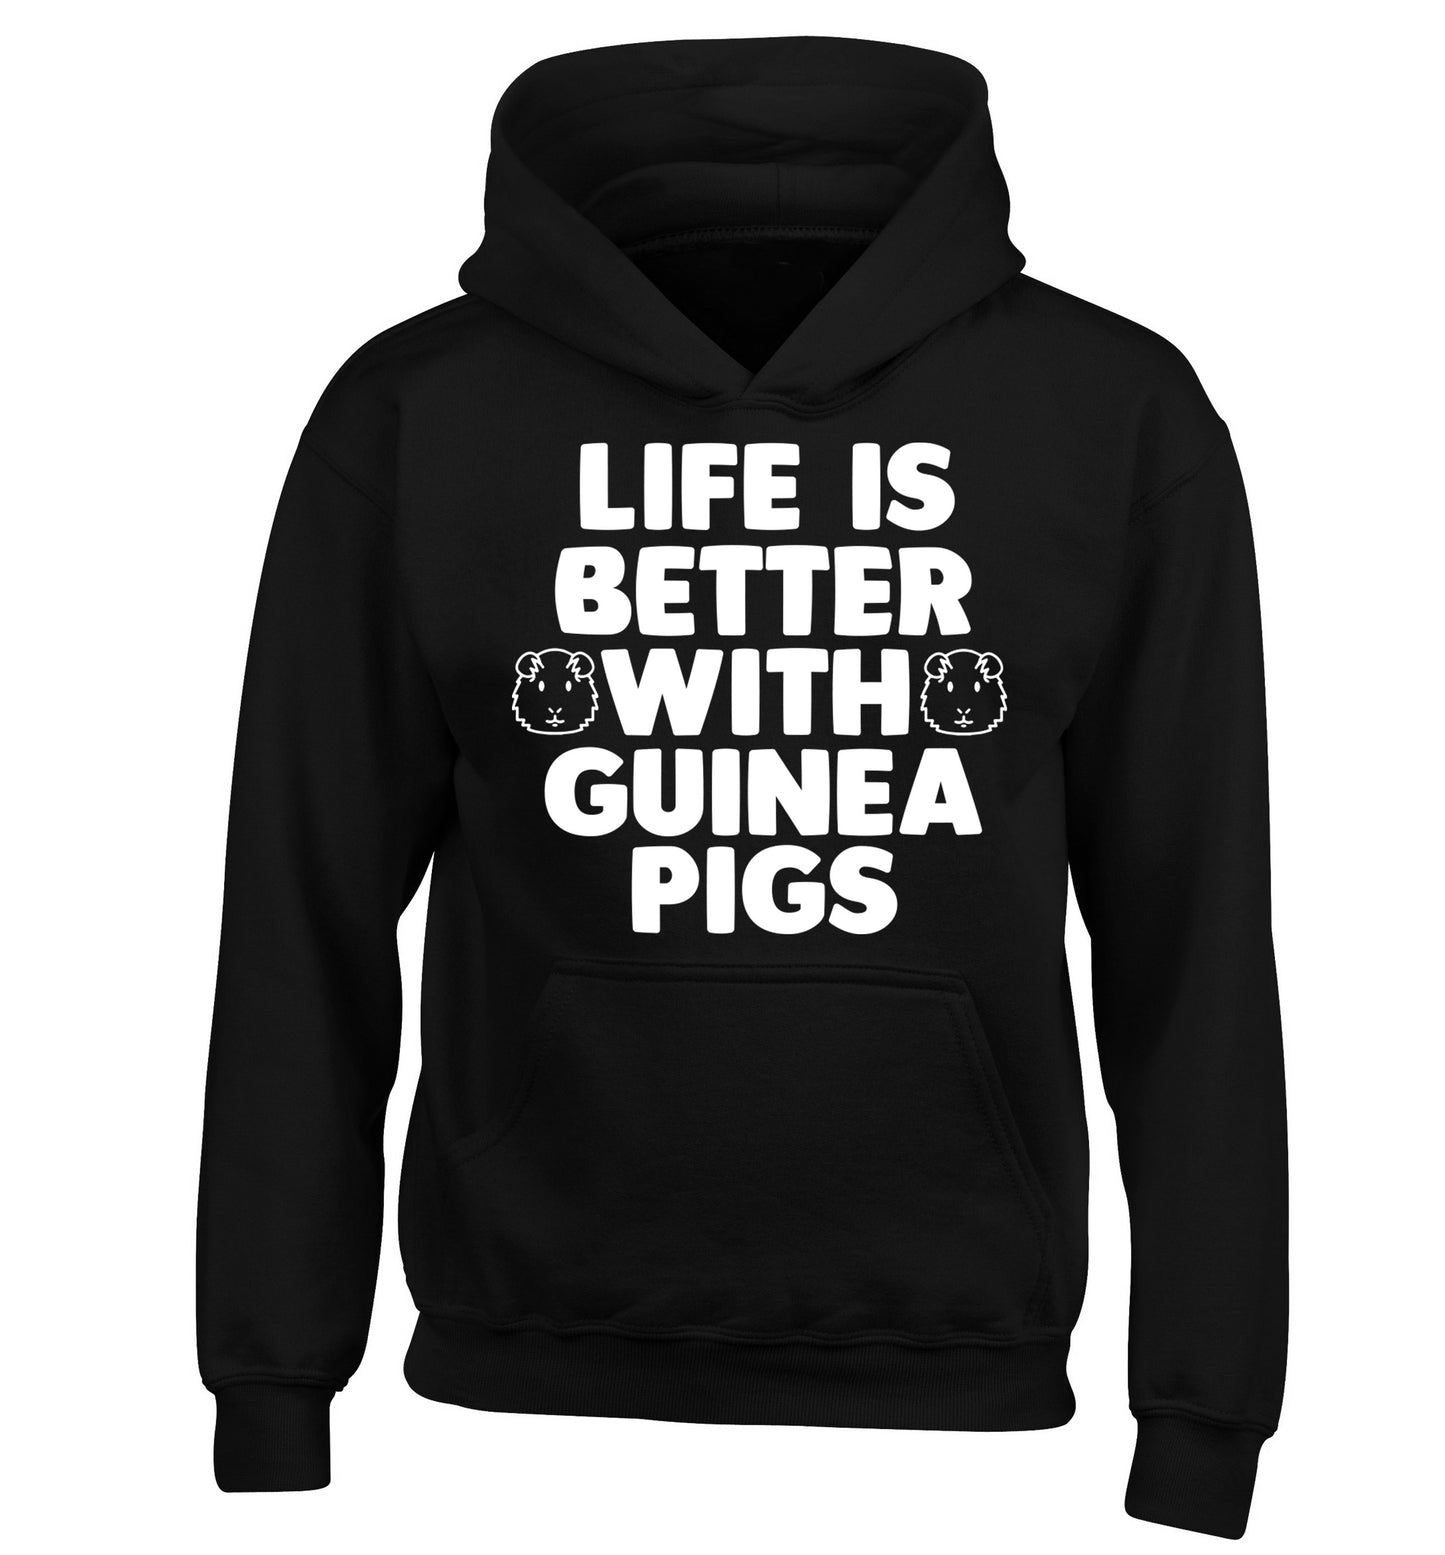 Life is better with guinea pigs children's black hoodie 12-14 Years